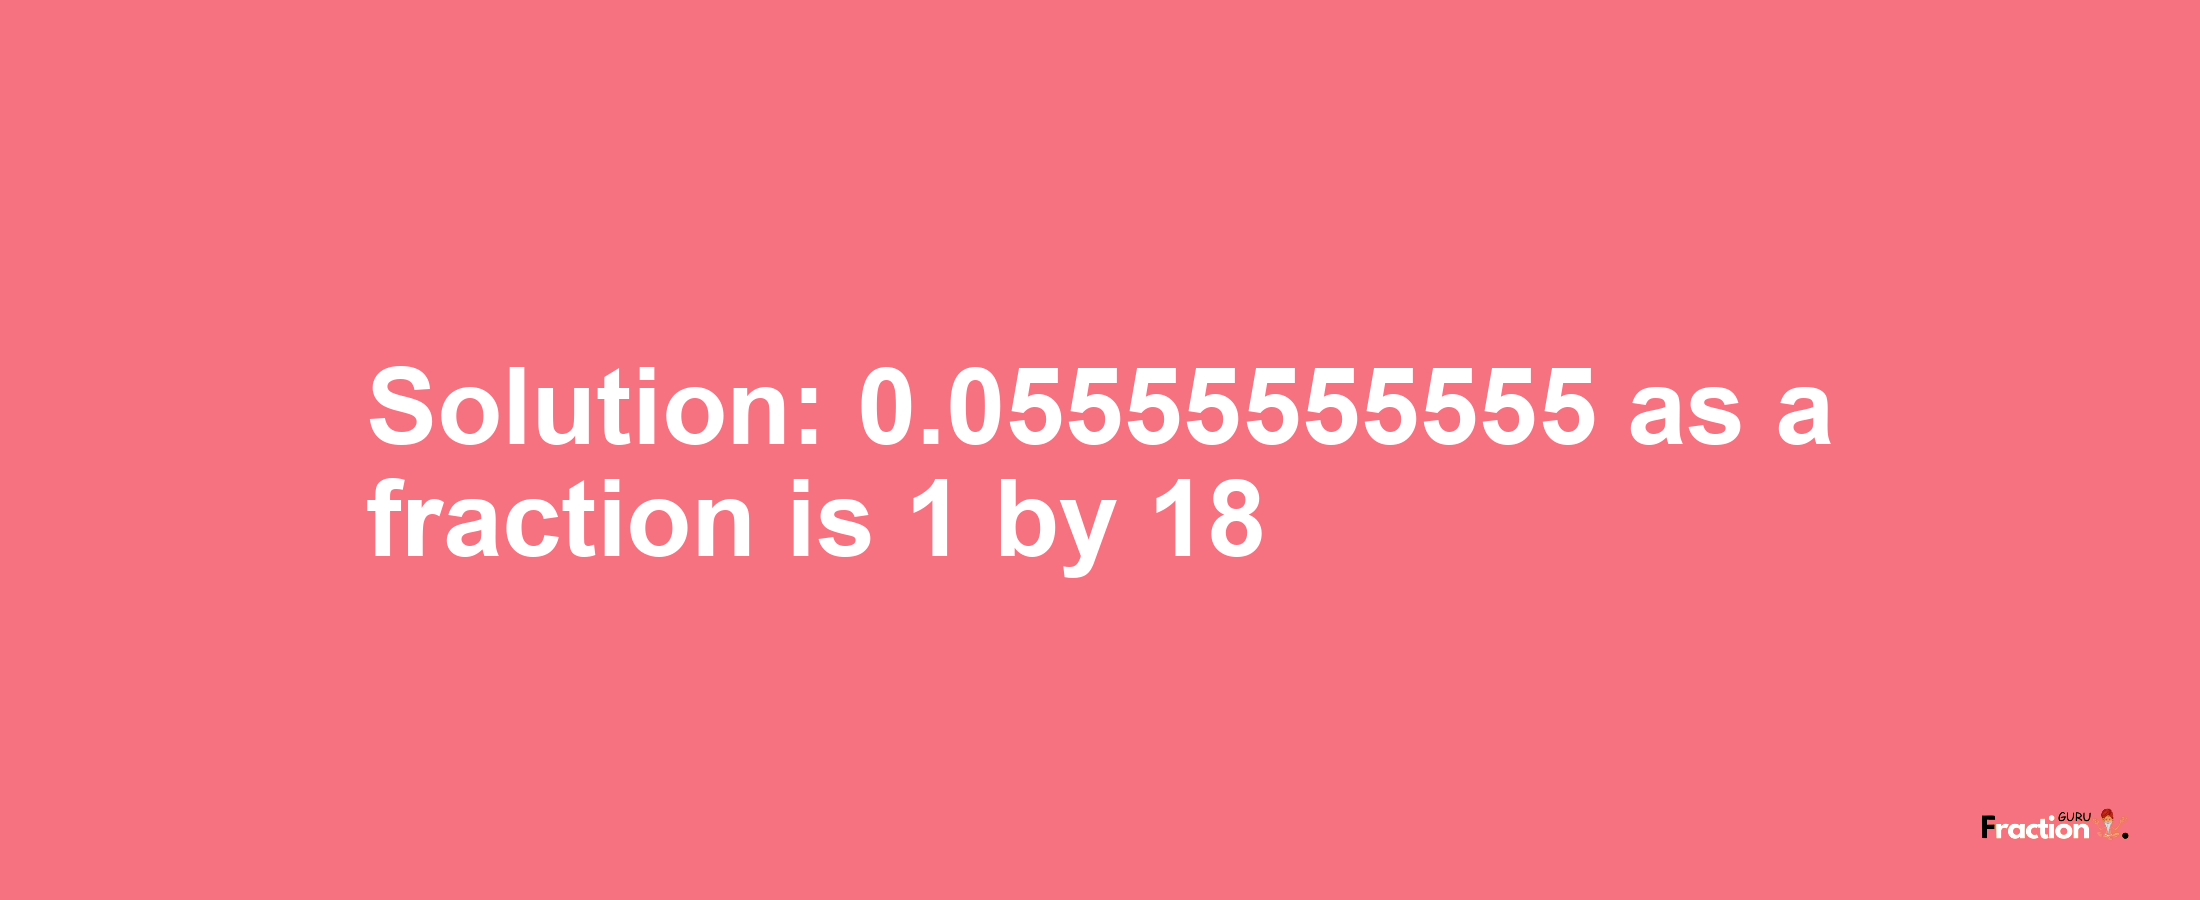 Solution:0.05555555555 as a fraction is 1/18